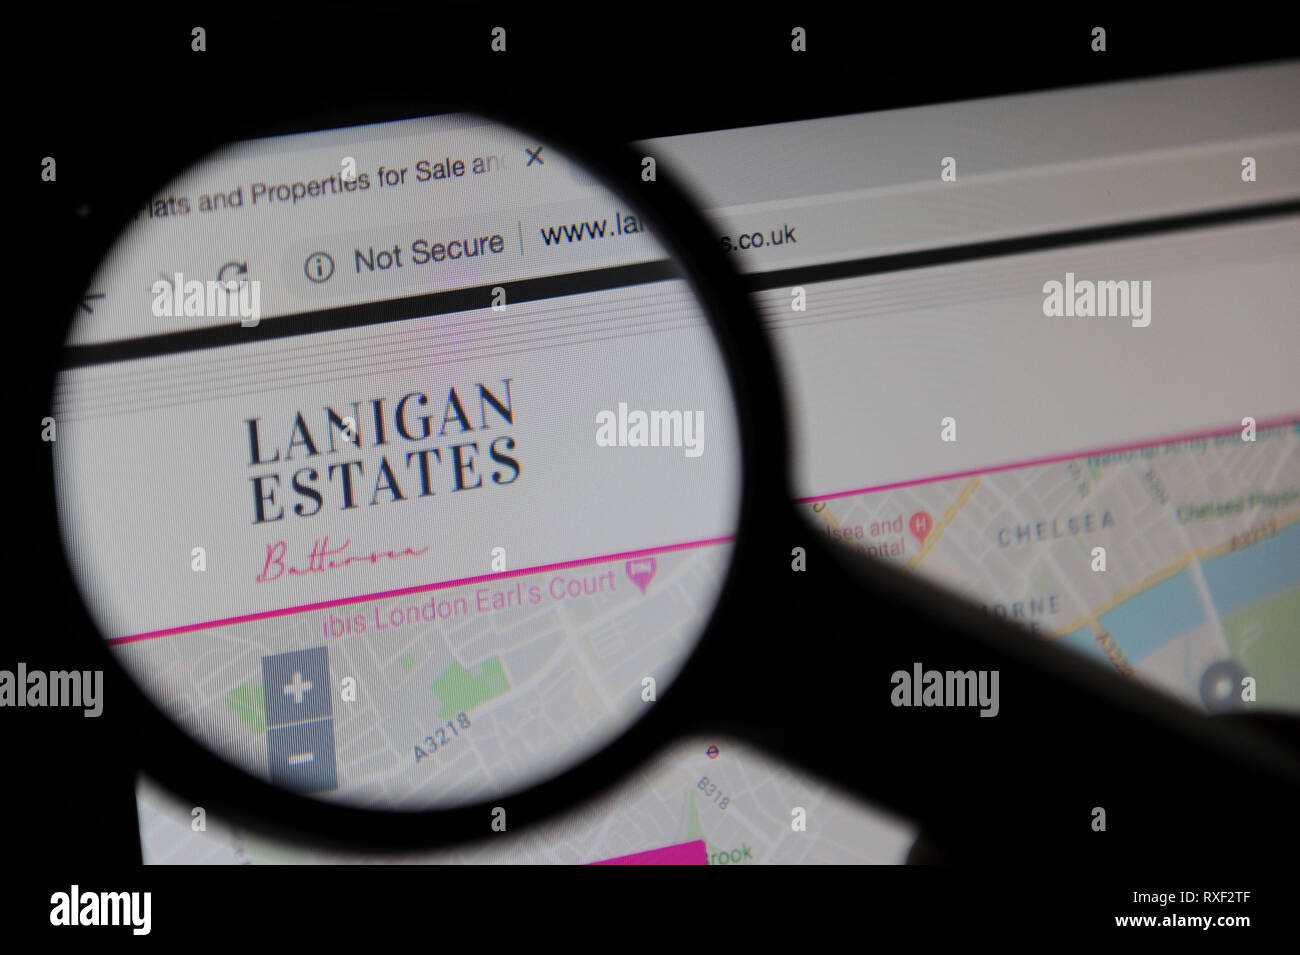 Lanigan Estate agent's website seen through a magnifying glass Stock Photo